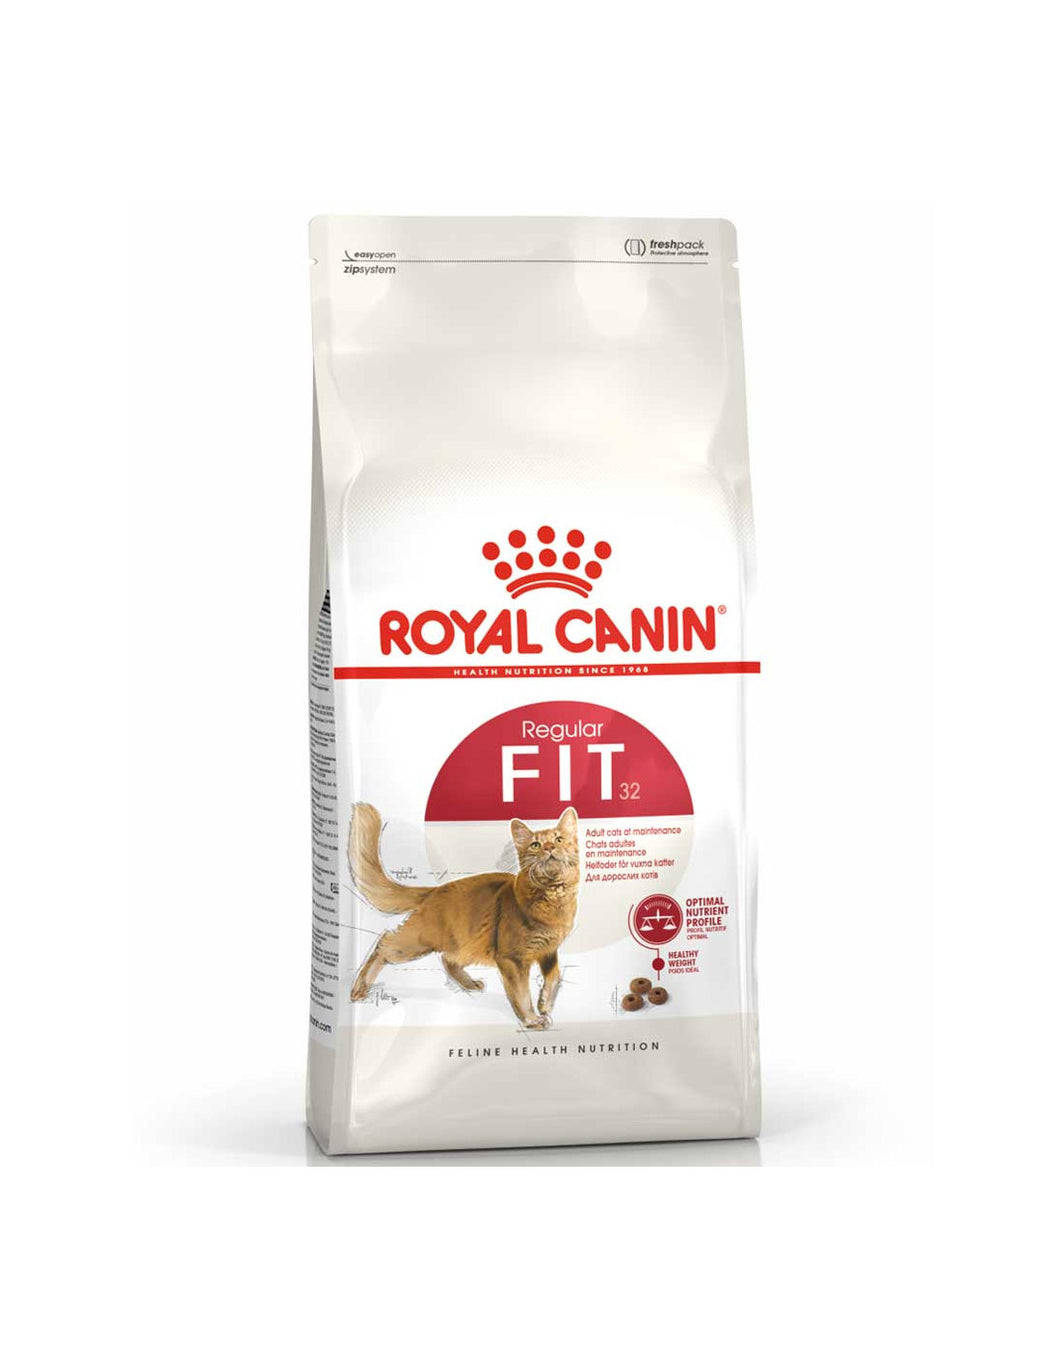 Royal Canin - FIT32